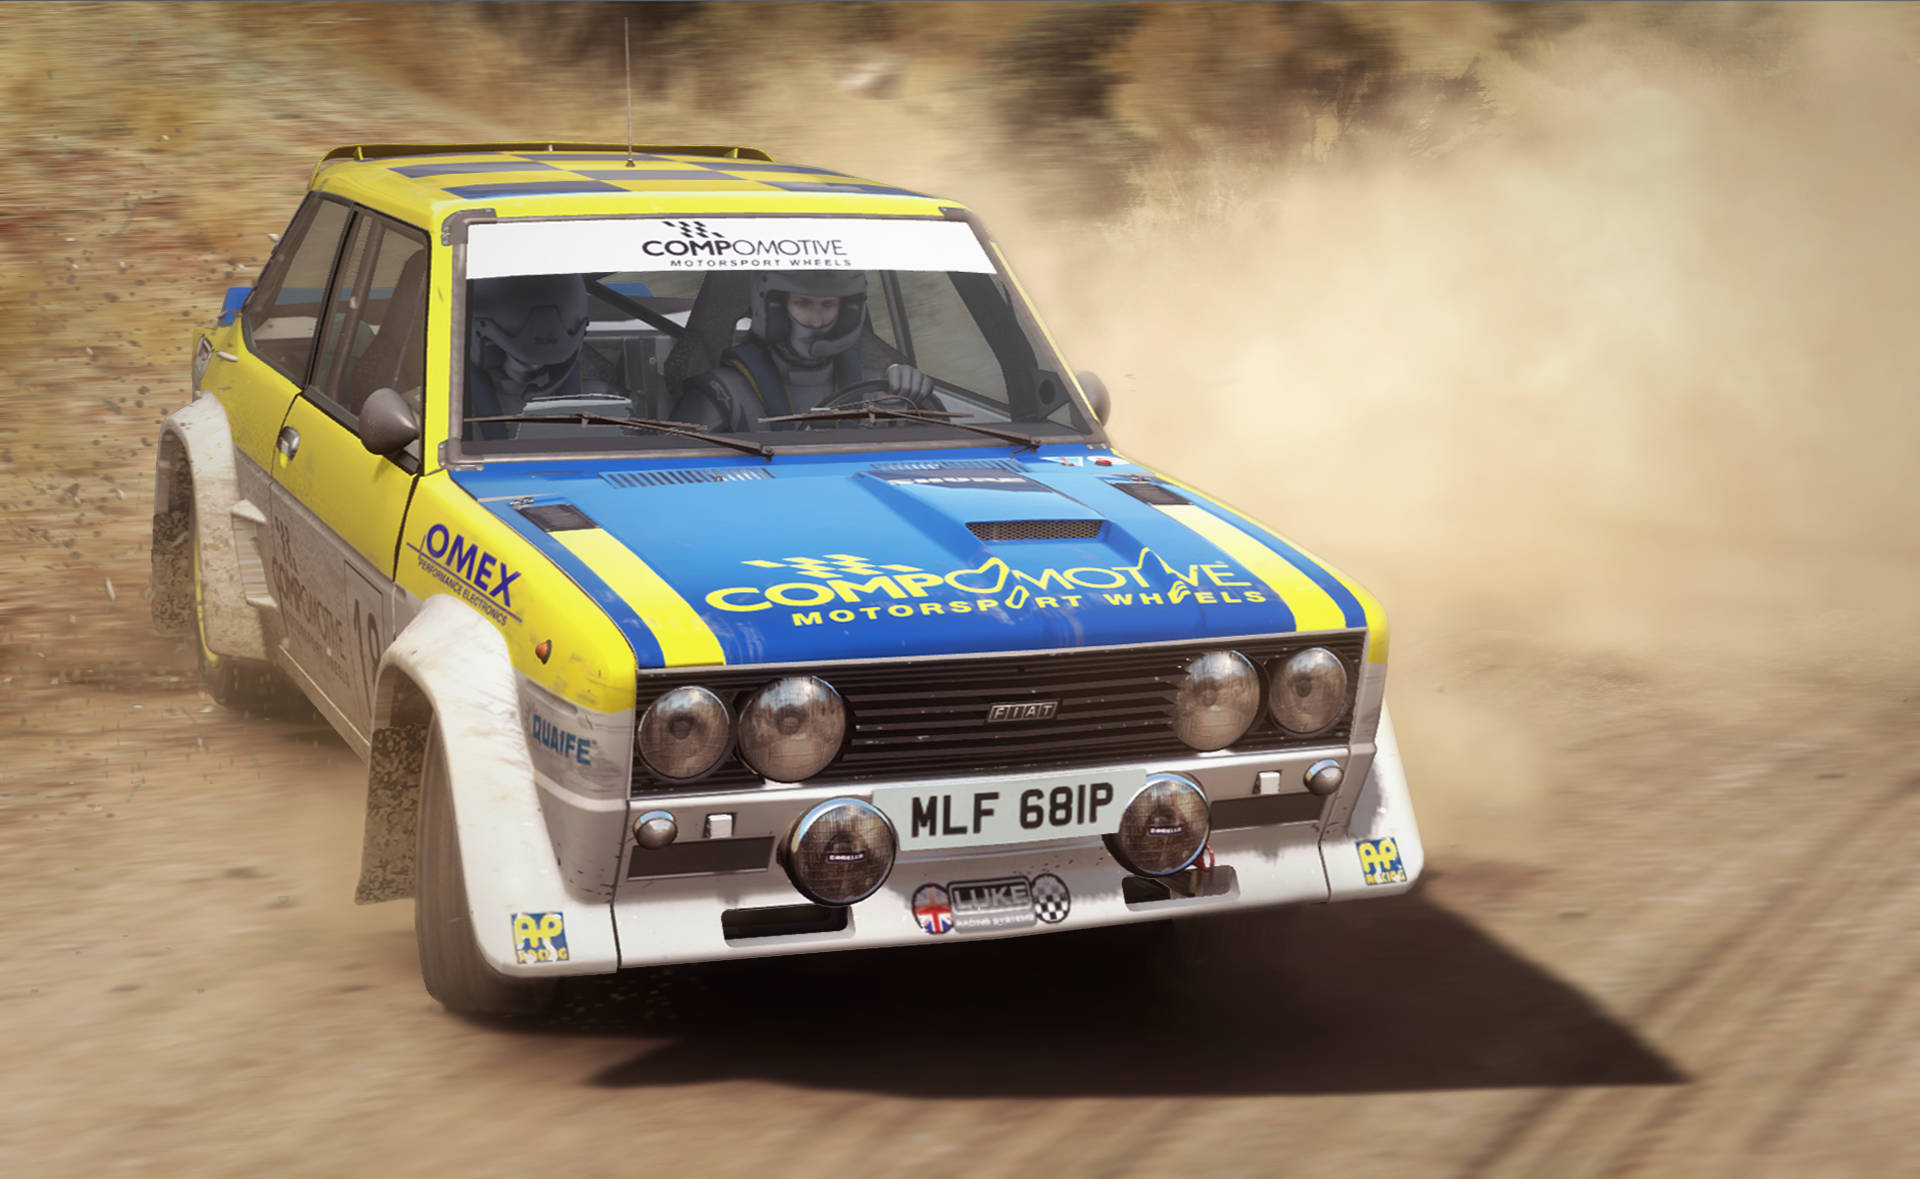 Caption: Dazzling Drive - A Dirt Rally Racing Event In Full Swing.